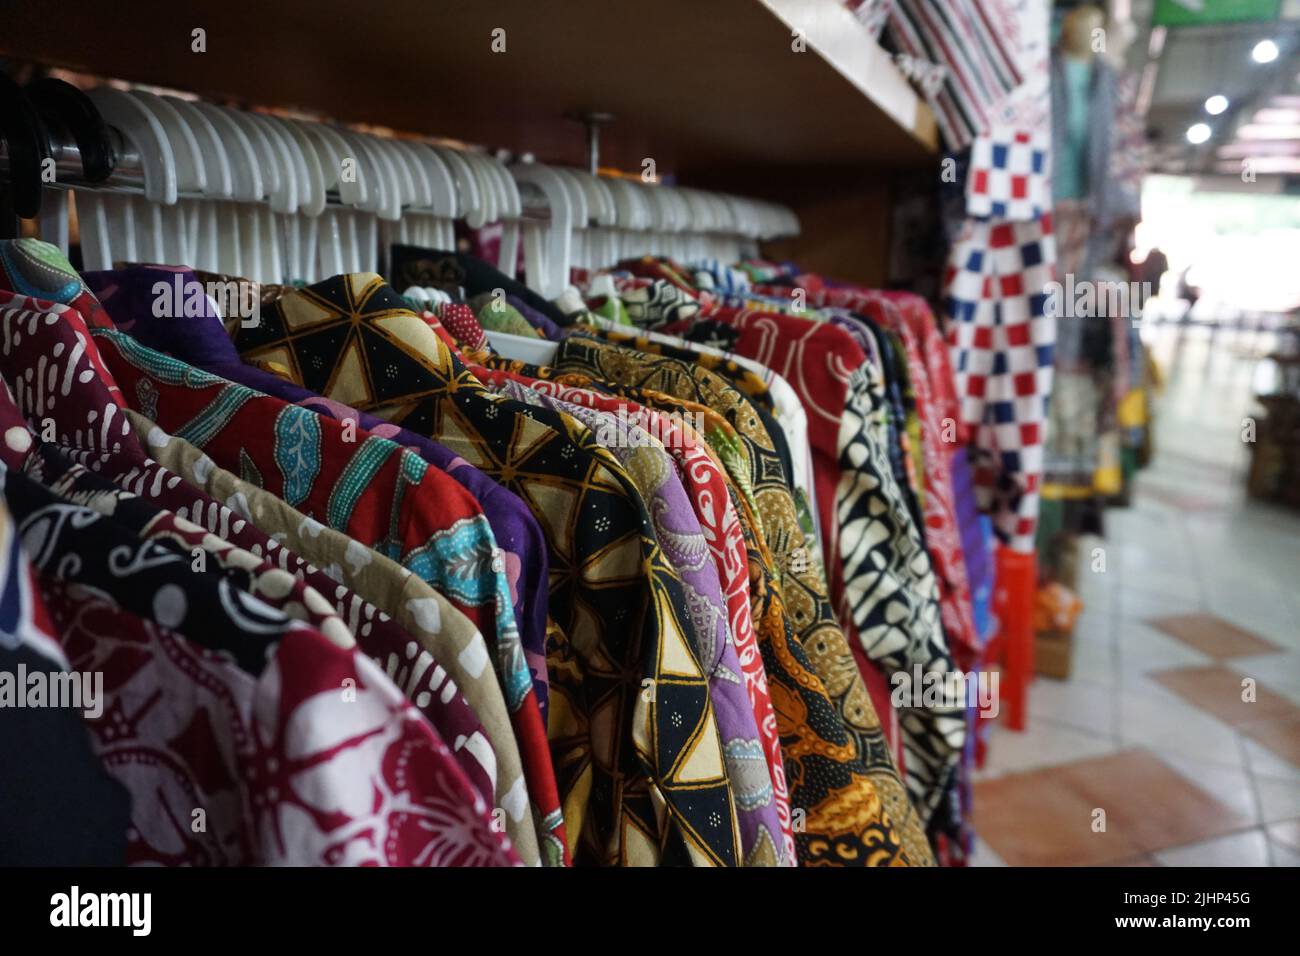 Solo, Indonesia - July 16th, 2022.Hanging Batik shirt at the Pusat Grosir Solo Market. One of many Batik market in the city. Stock Photo